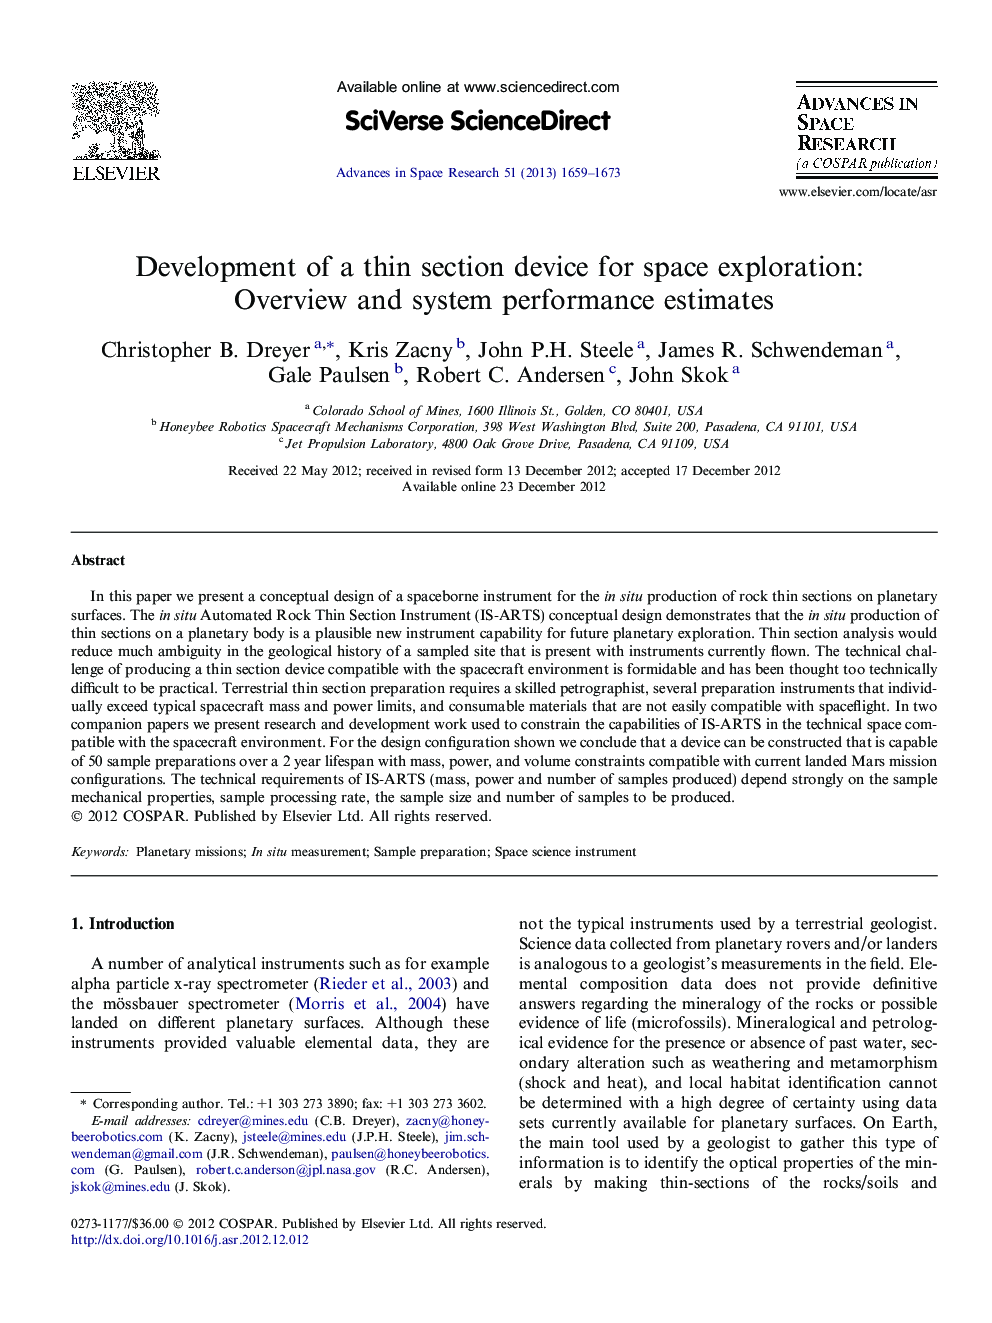 Development of a thin section device for space exploration: Overview and system performance estimates